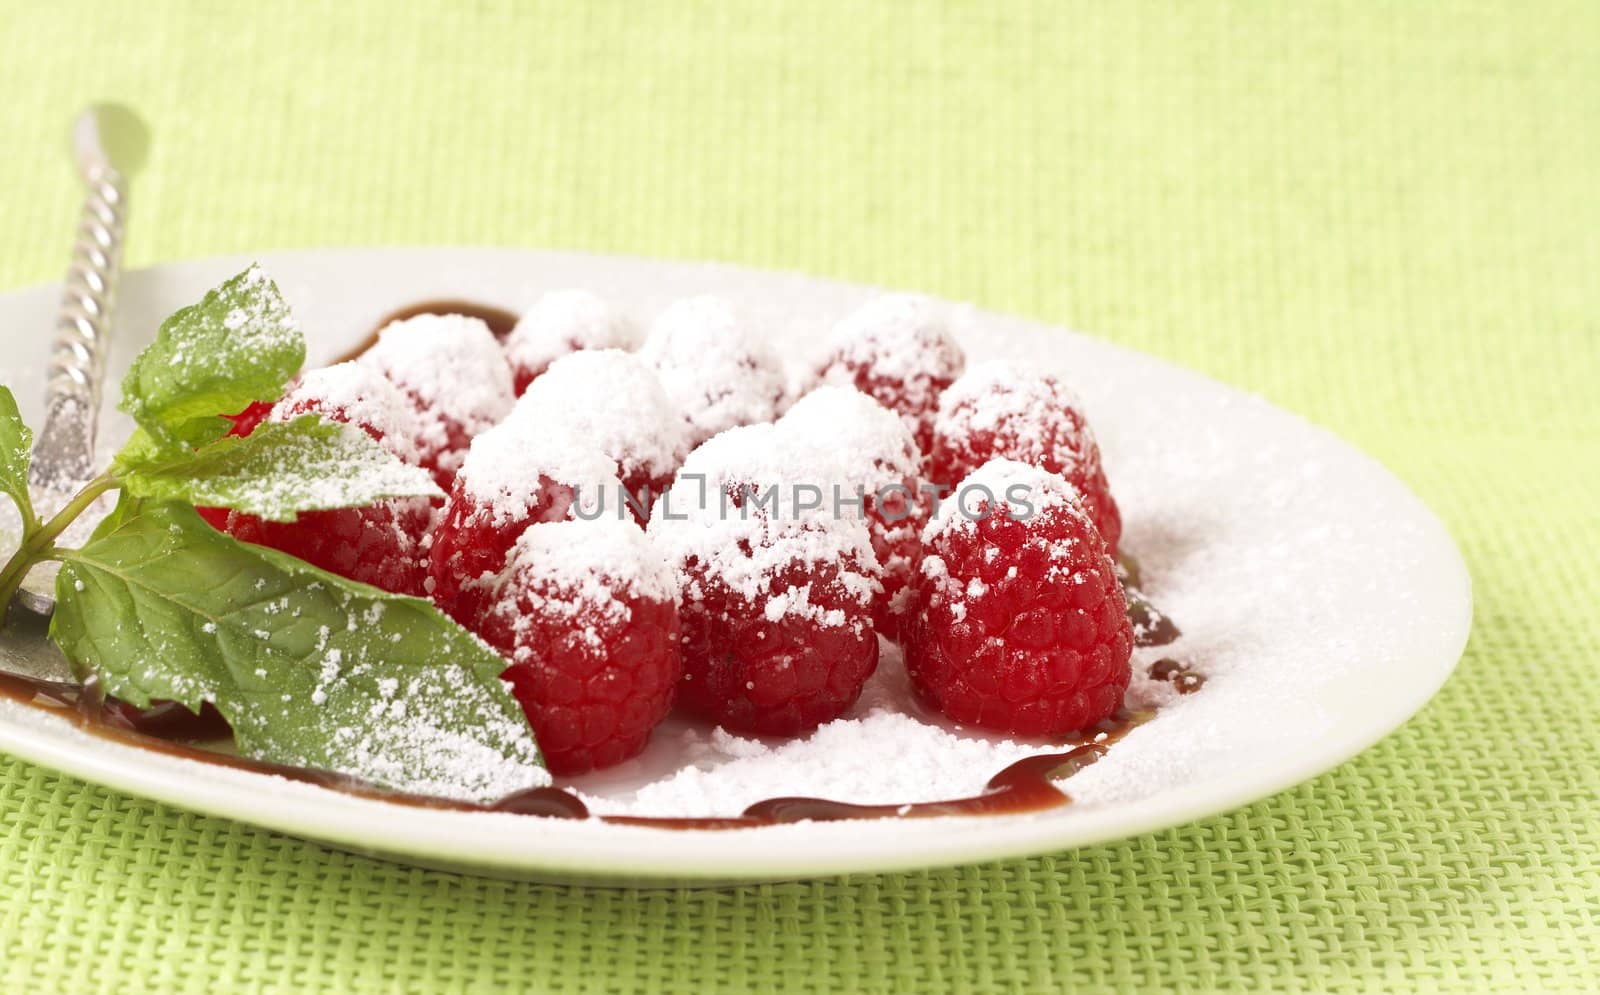 Fresh raspberry dessert served on a white plate, garnished with mint, chocolate sauce and icing sugar